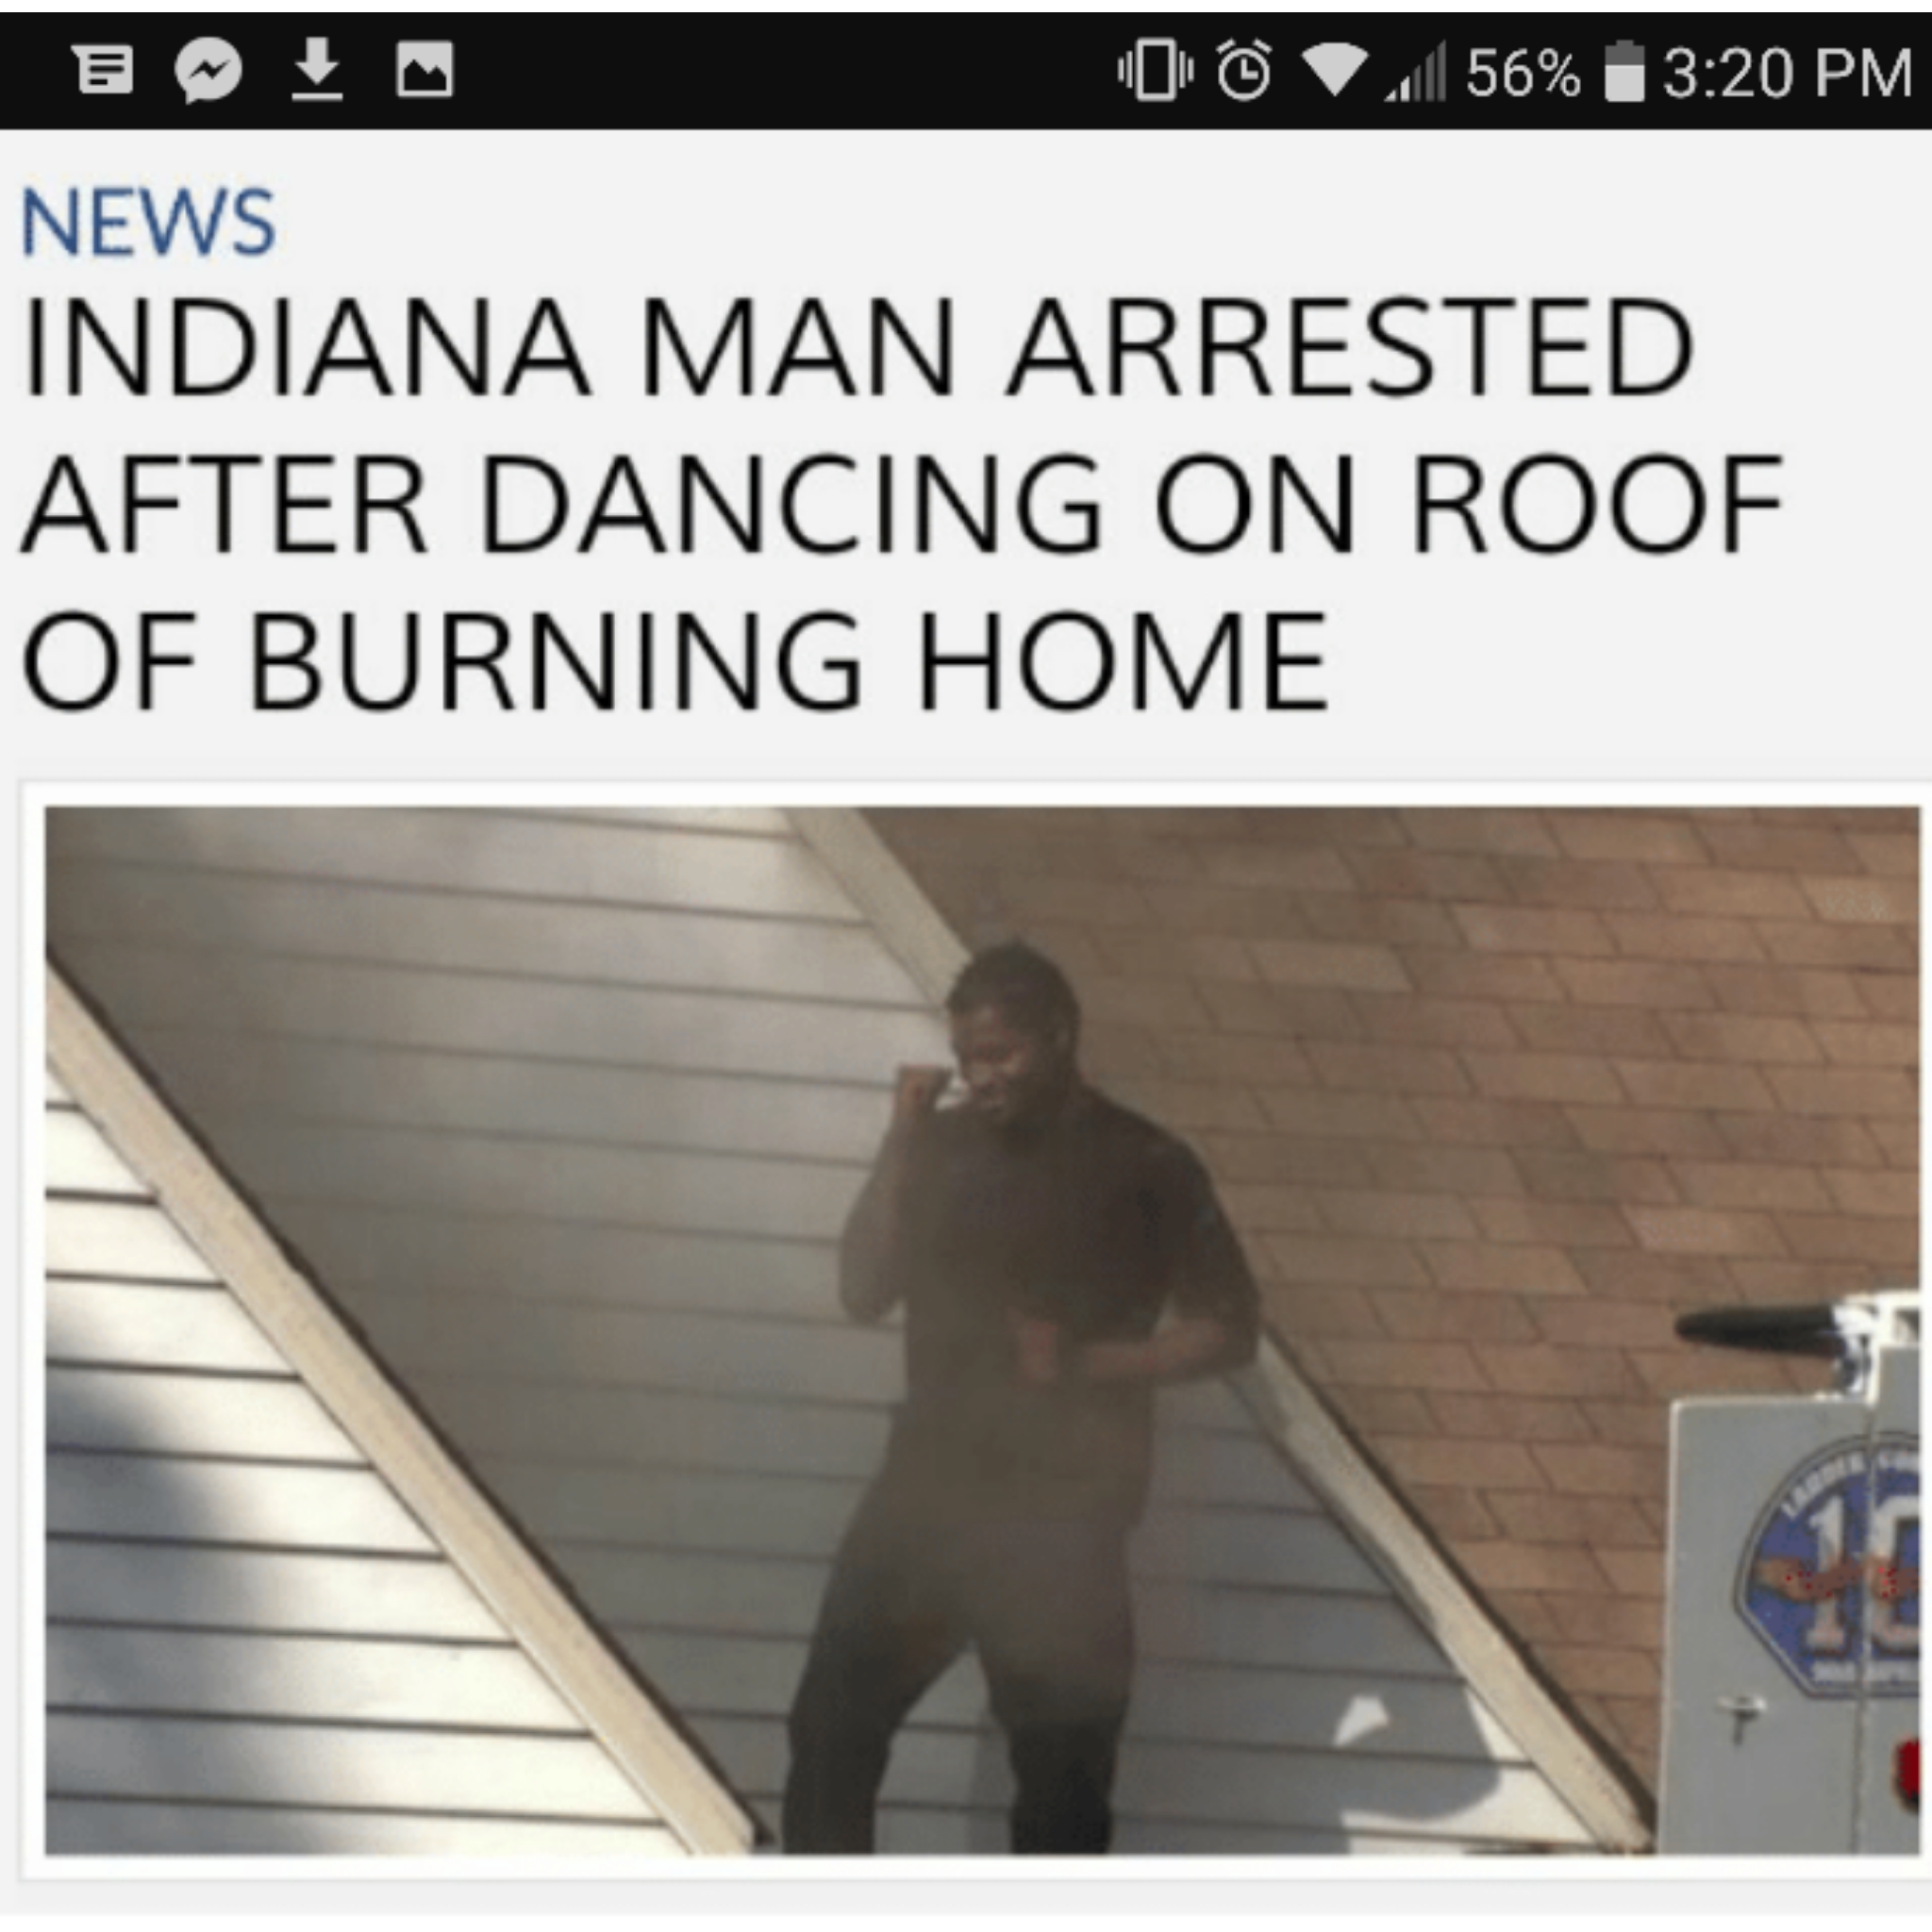 roof - Bio Ol 56% News Indiana Man Arrested After Dancing On Roof Of Burning Home